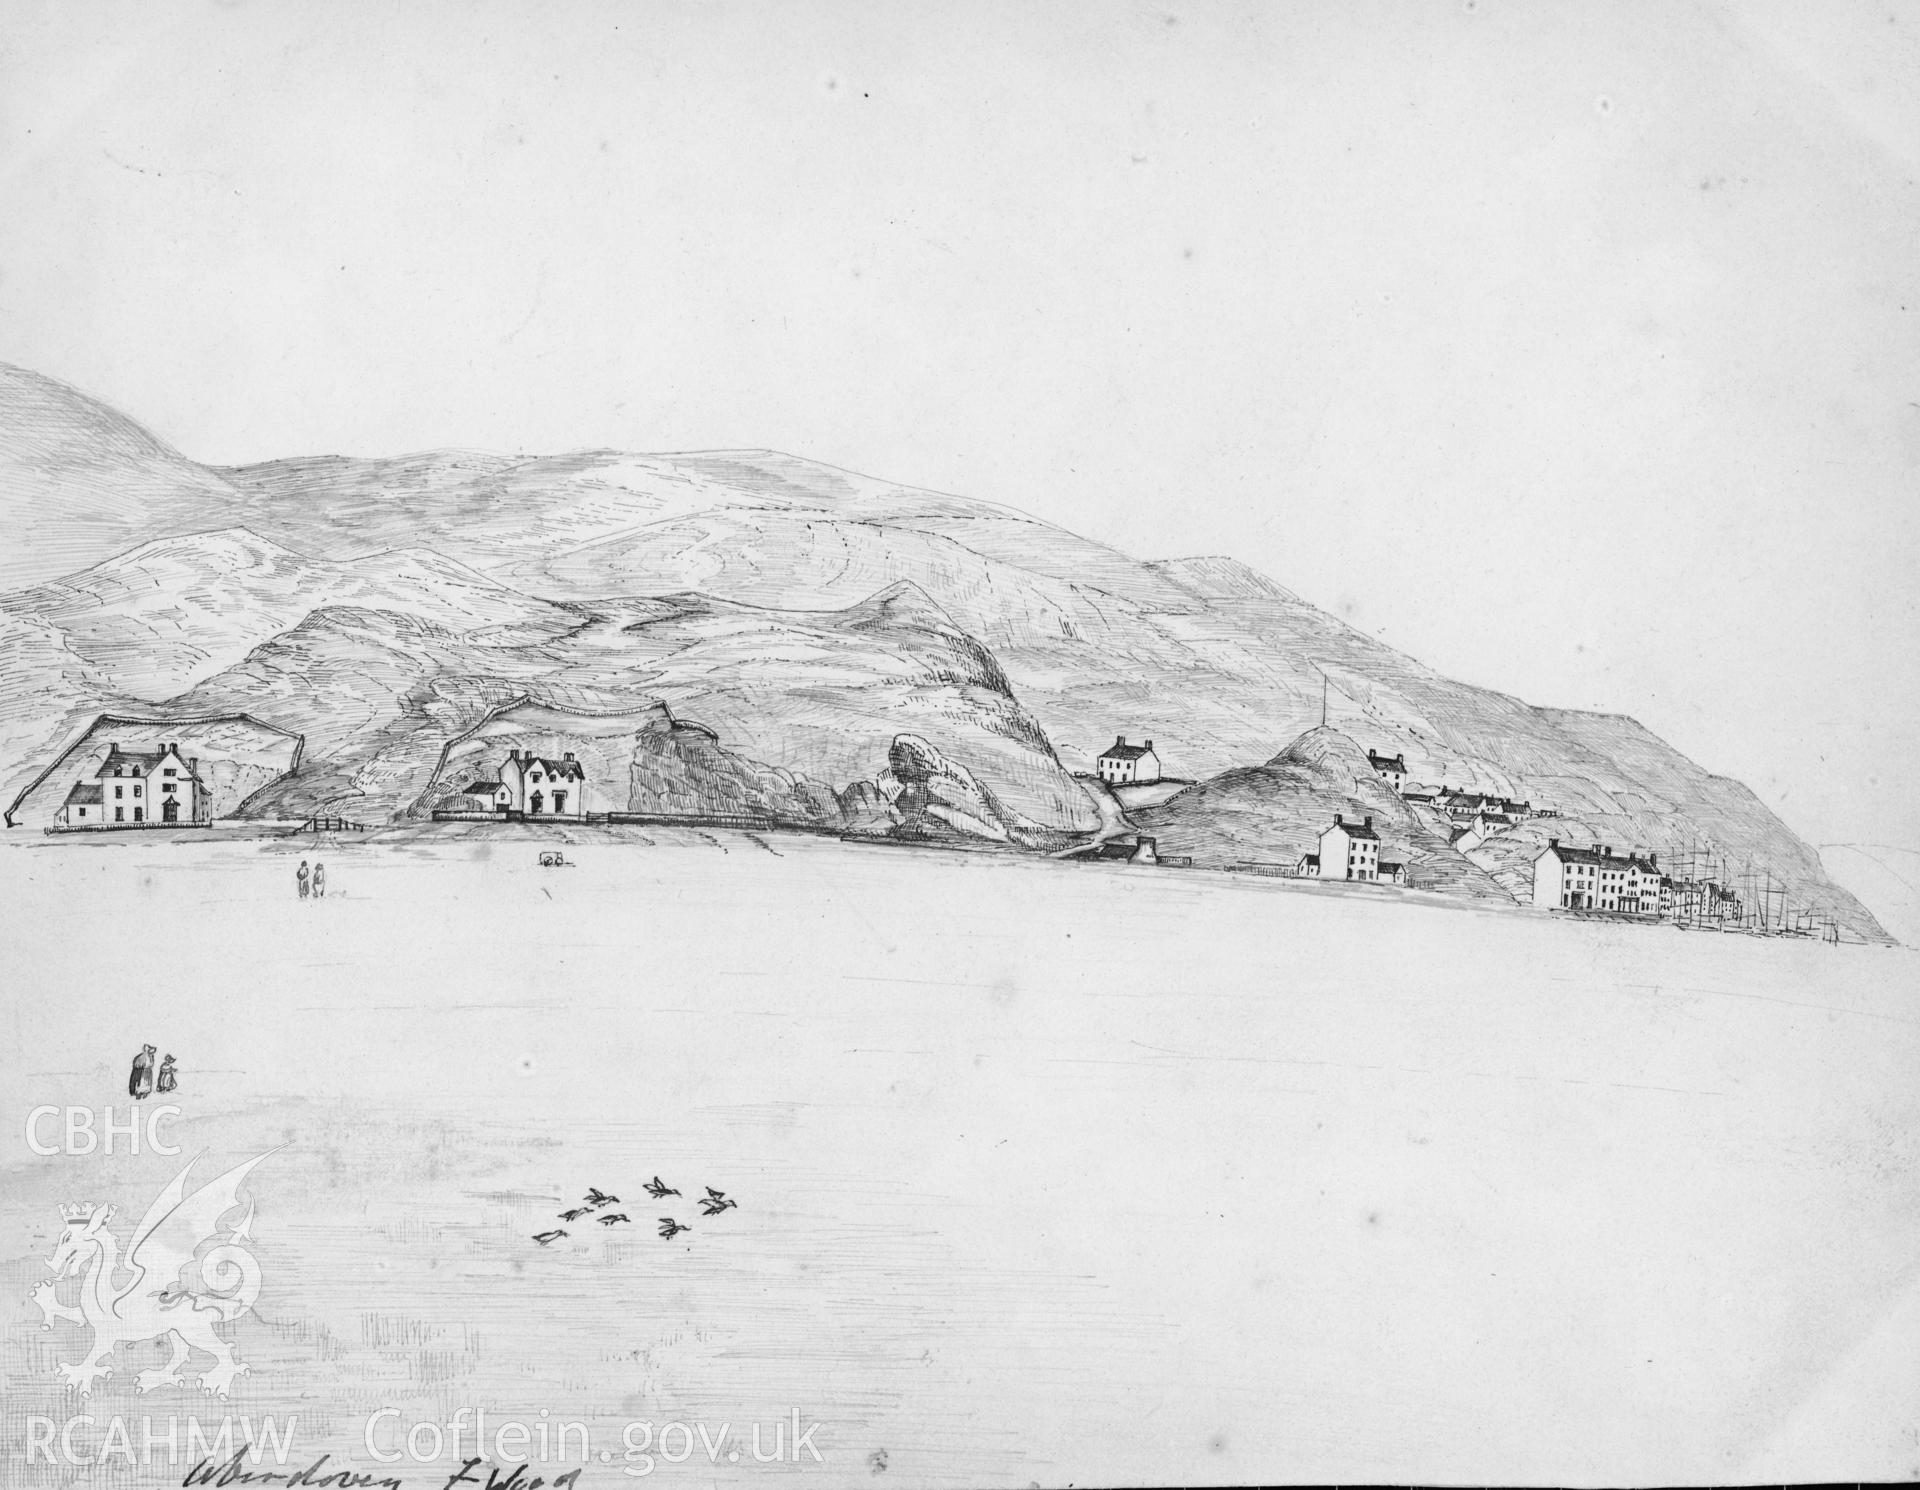 Digital copy of an ink sketch showing view of Aberdyfi, produced by F. Wood, c1840.